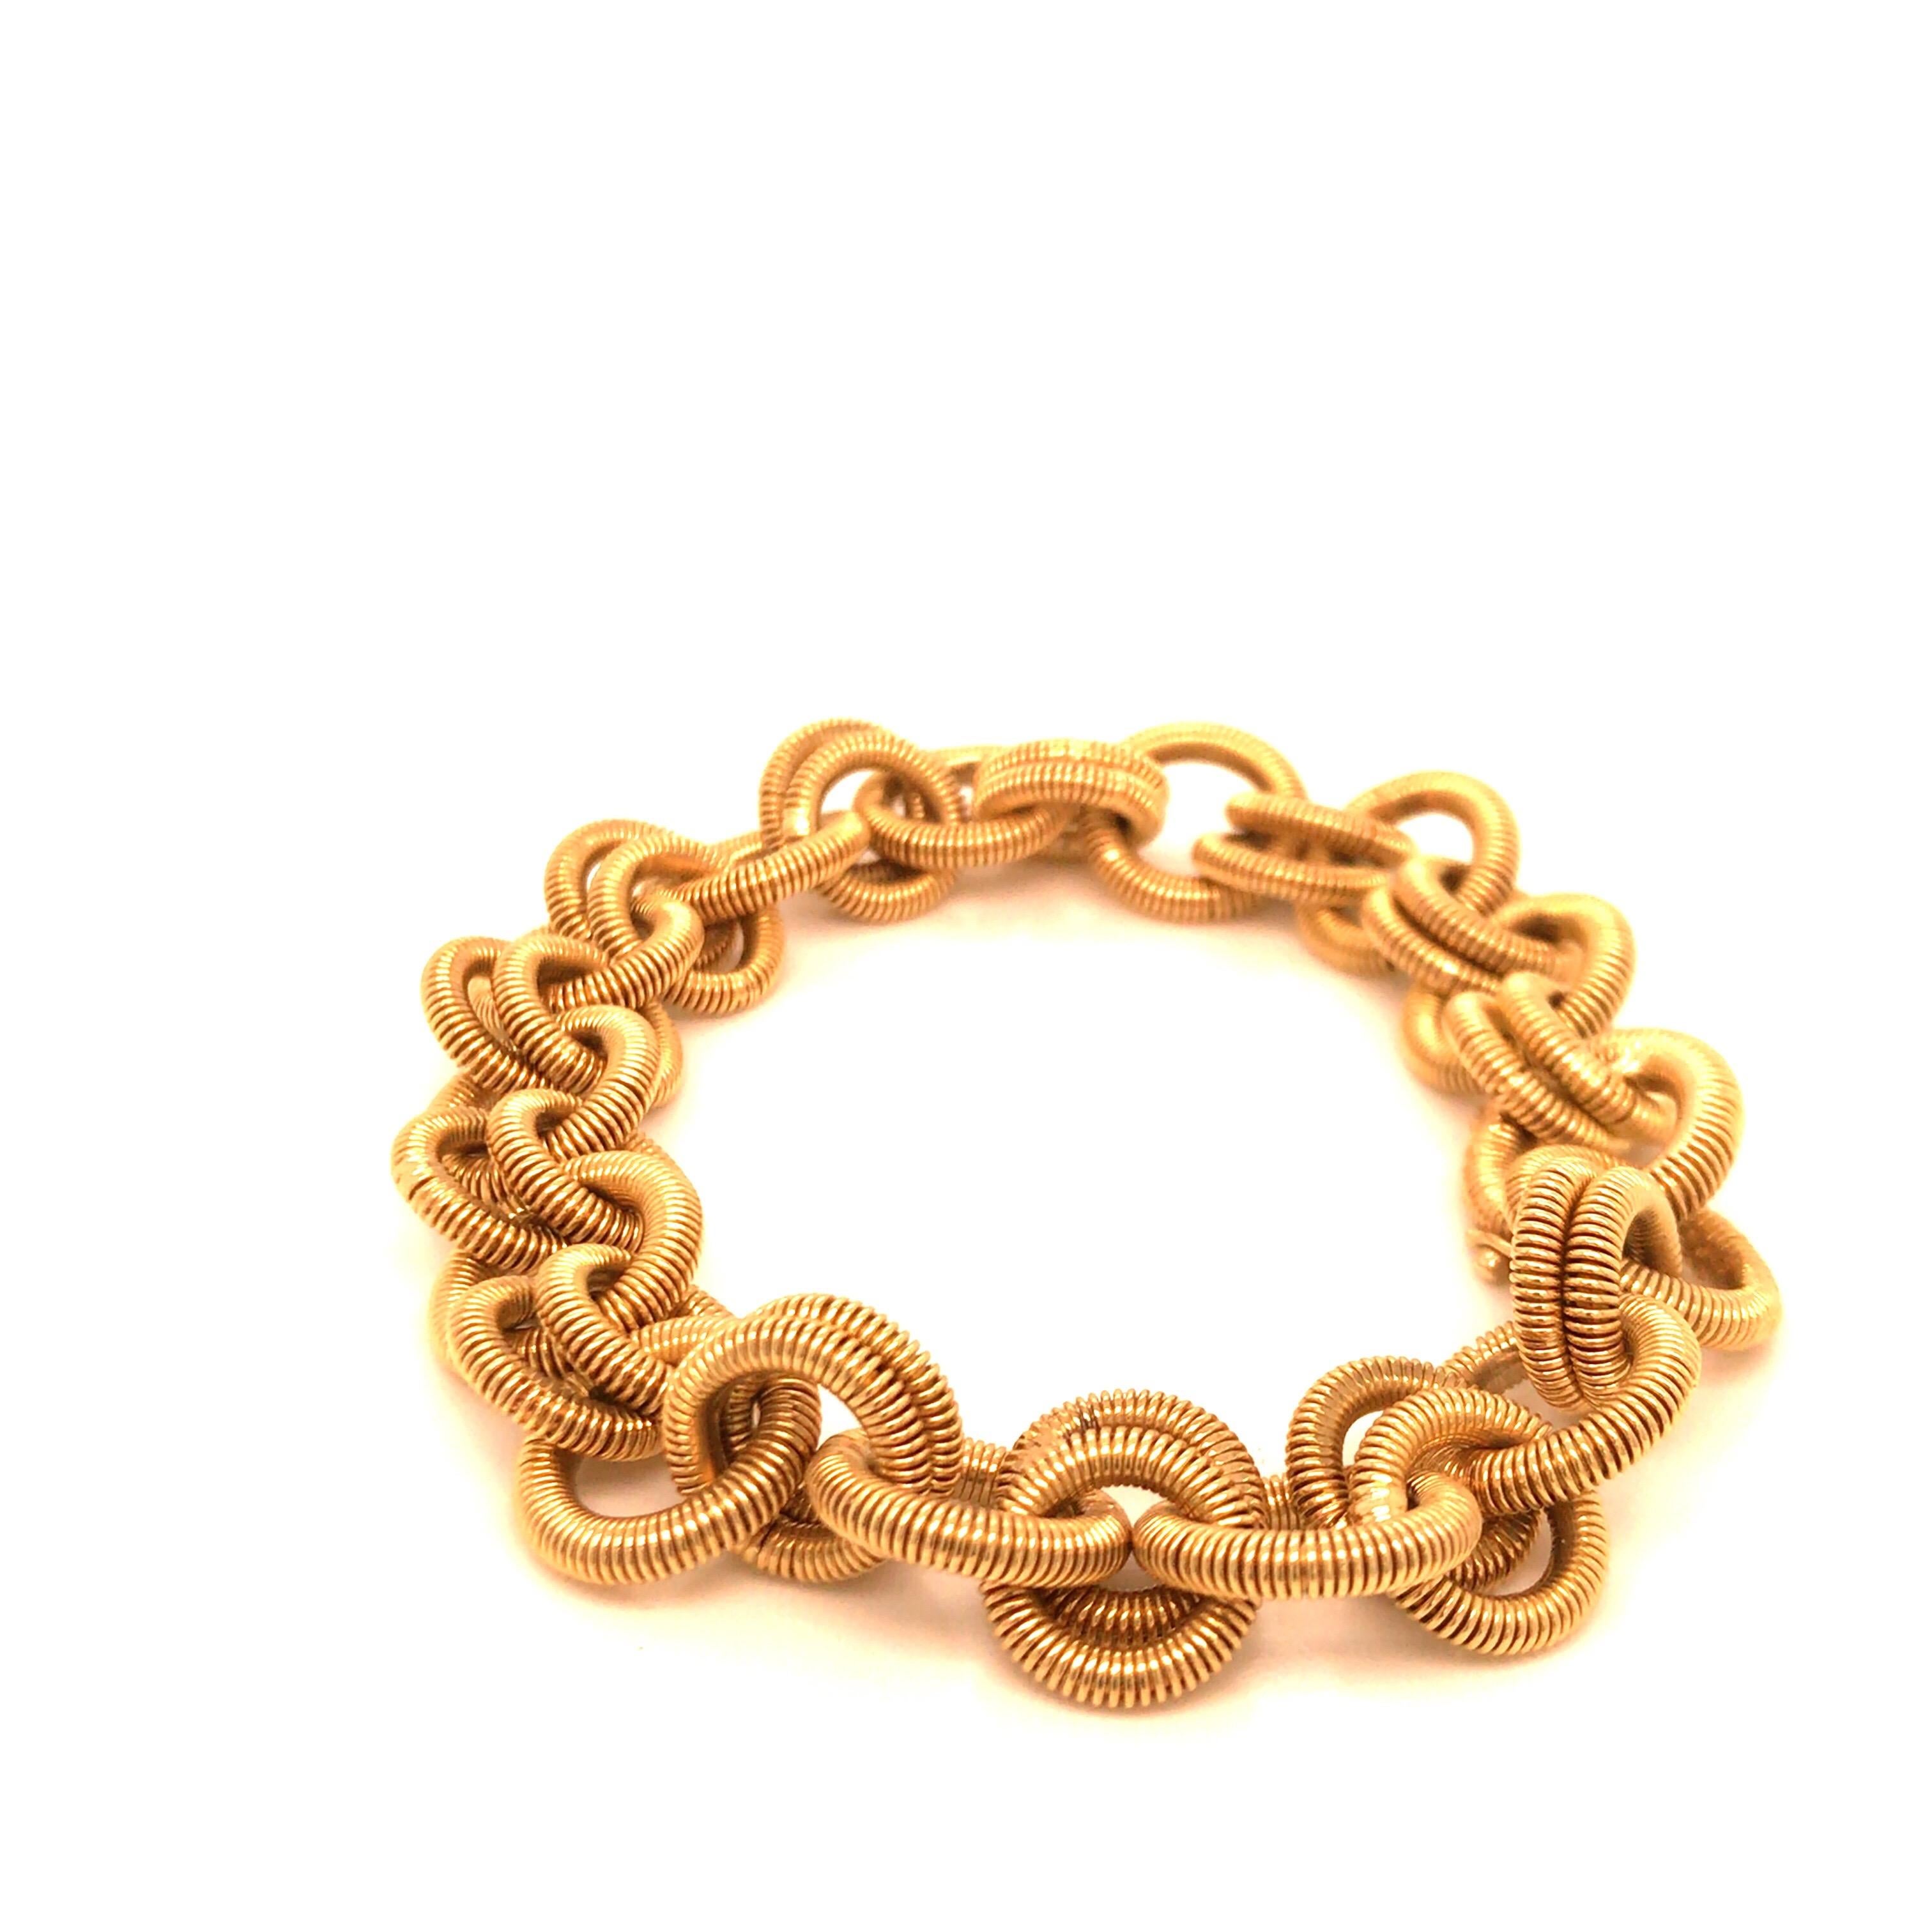 Vintage 1960's 18kt yellow gold coiled link bracelet - alternating with 1 larger link - that has a 12.5mm outer diameter - and 2 smaller links - 10.5mm outer diameter - with an overall length just shy of 7.5 inches. (19cm). It weighs 47.19 grams.